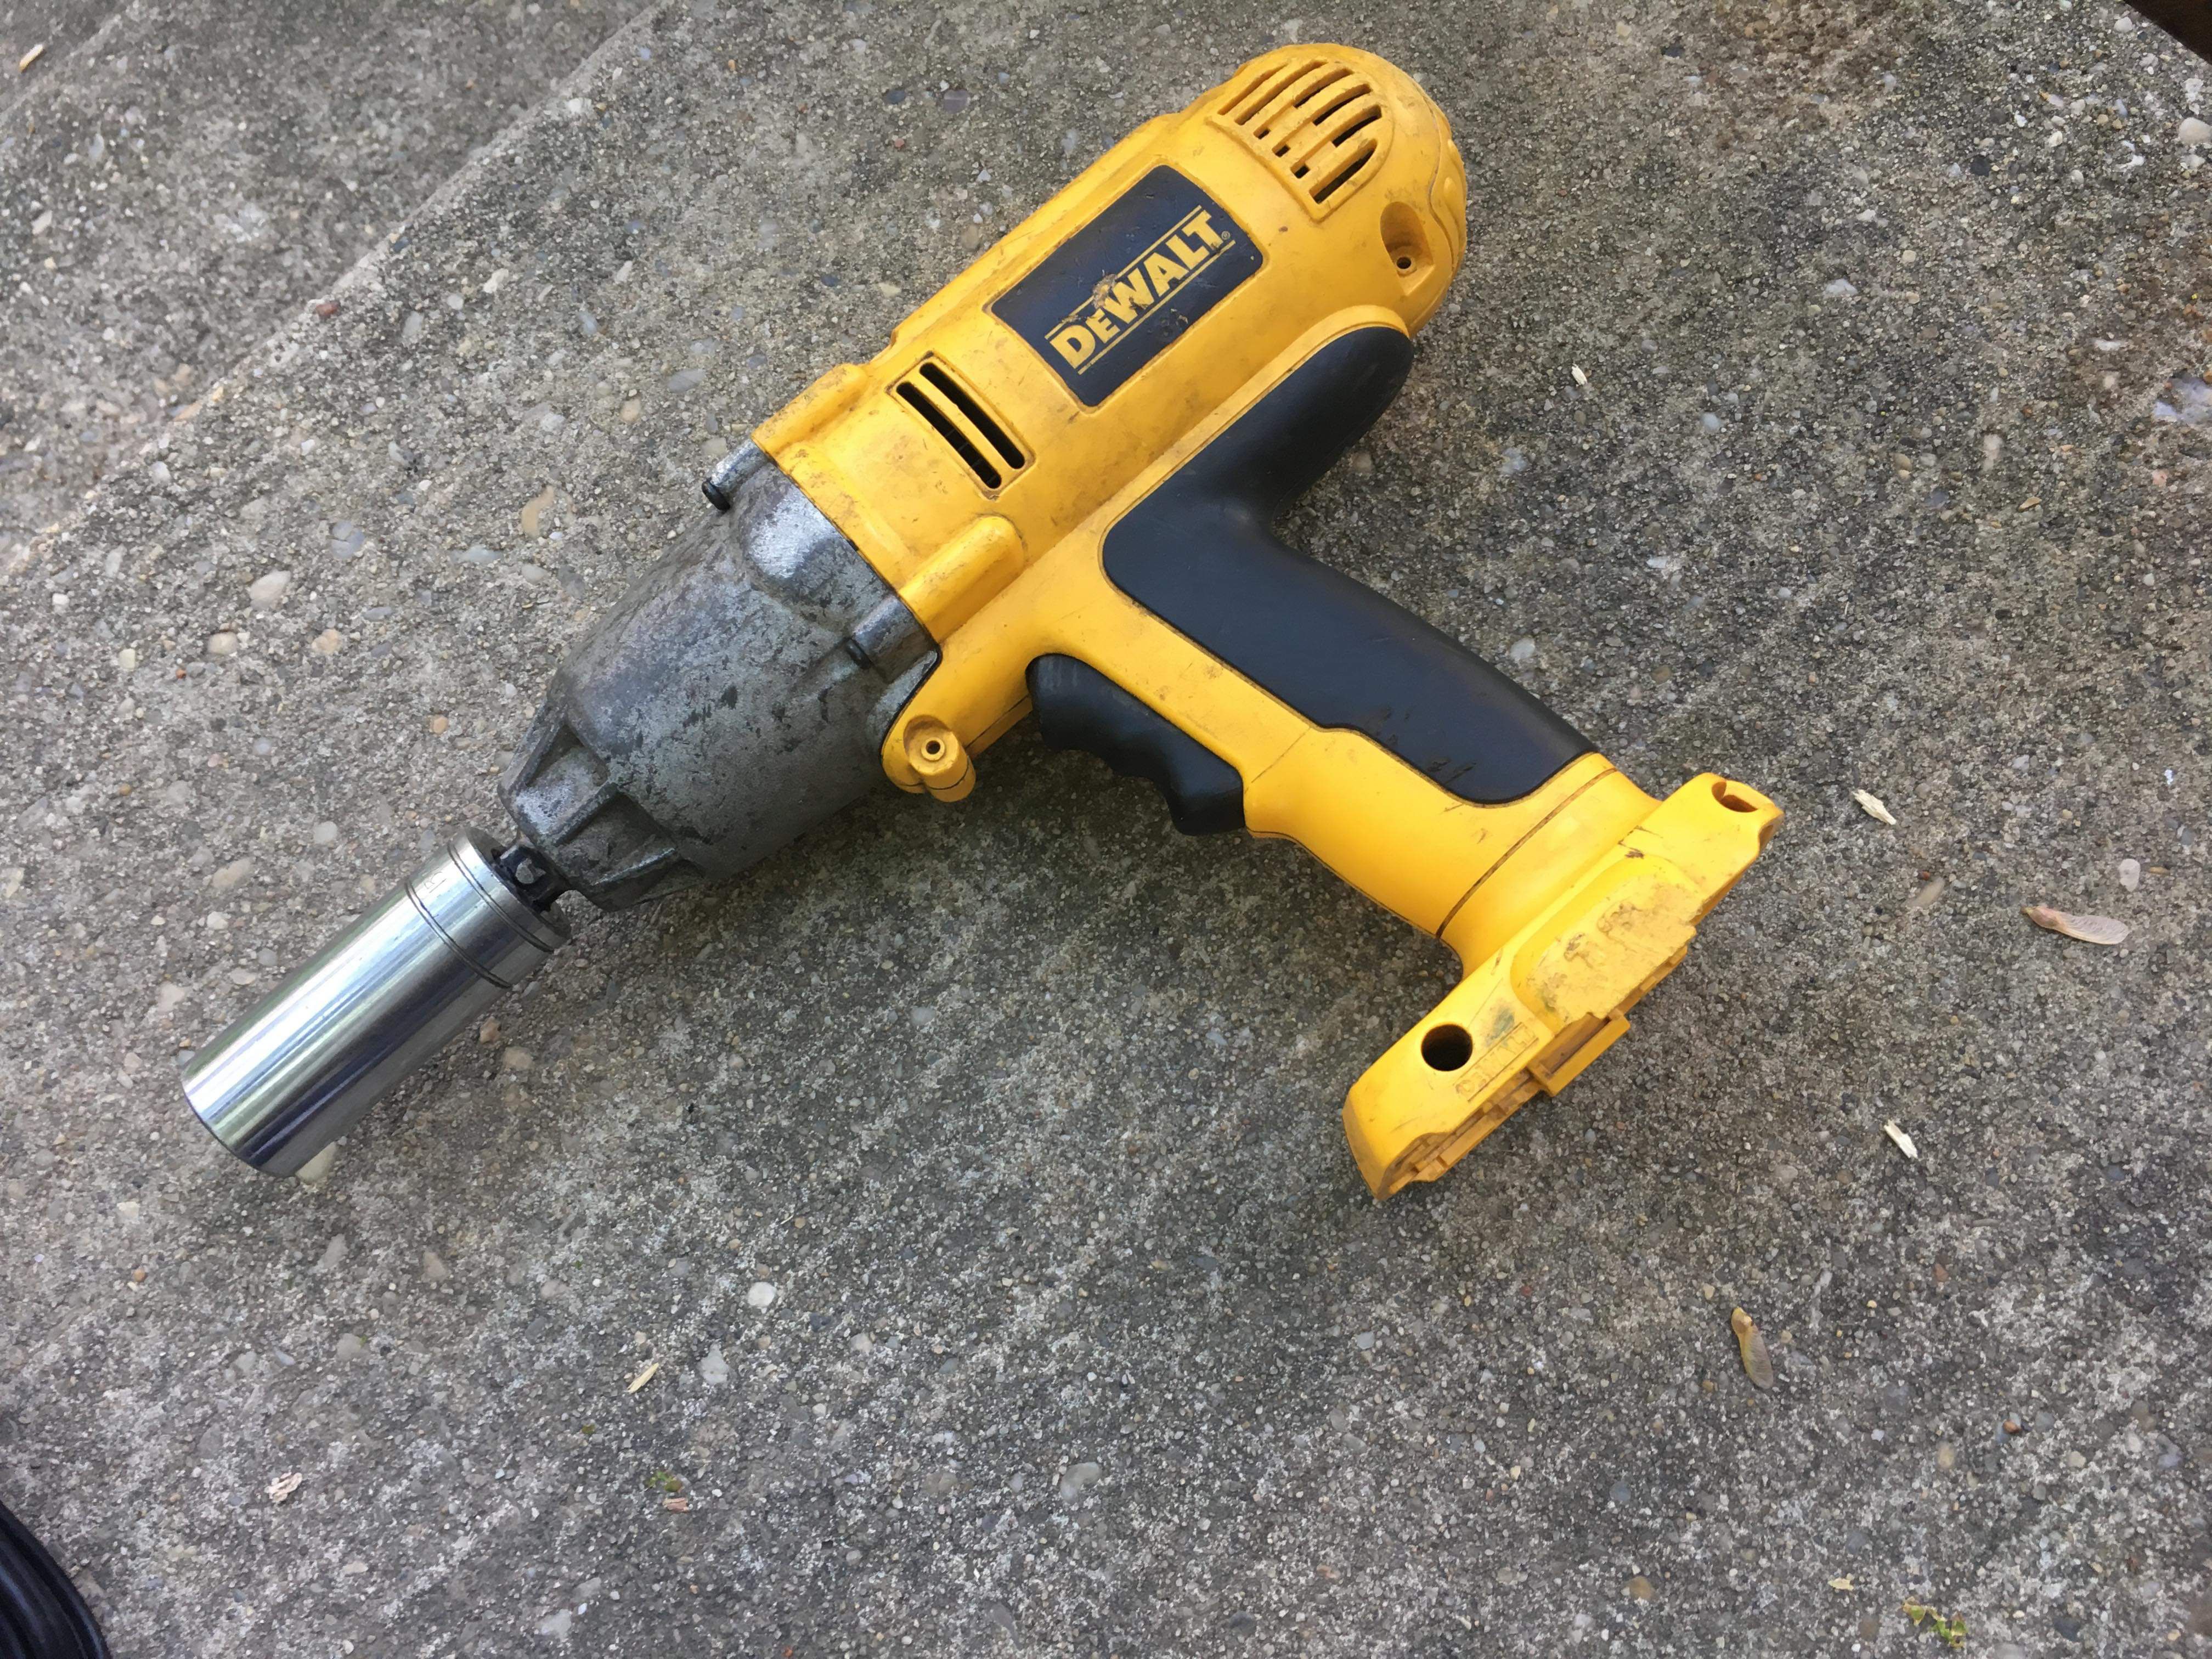 DeWalt impact drill wrench with battery charger